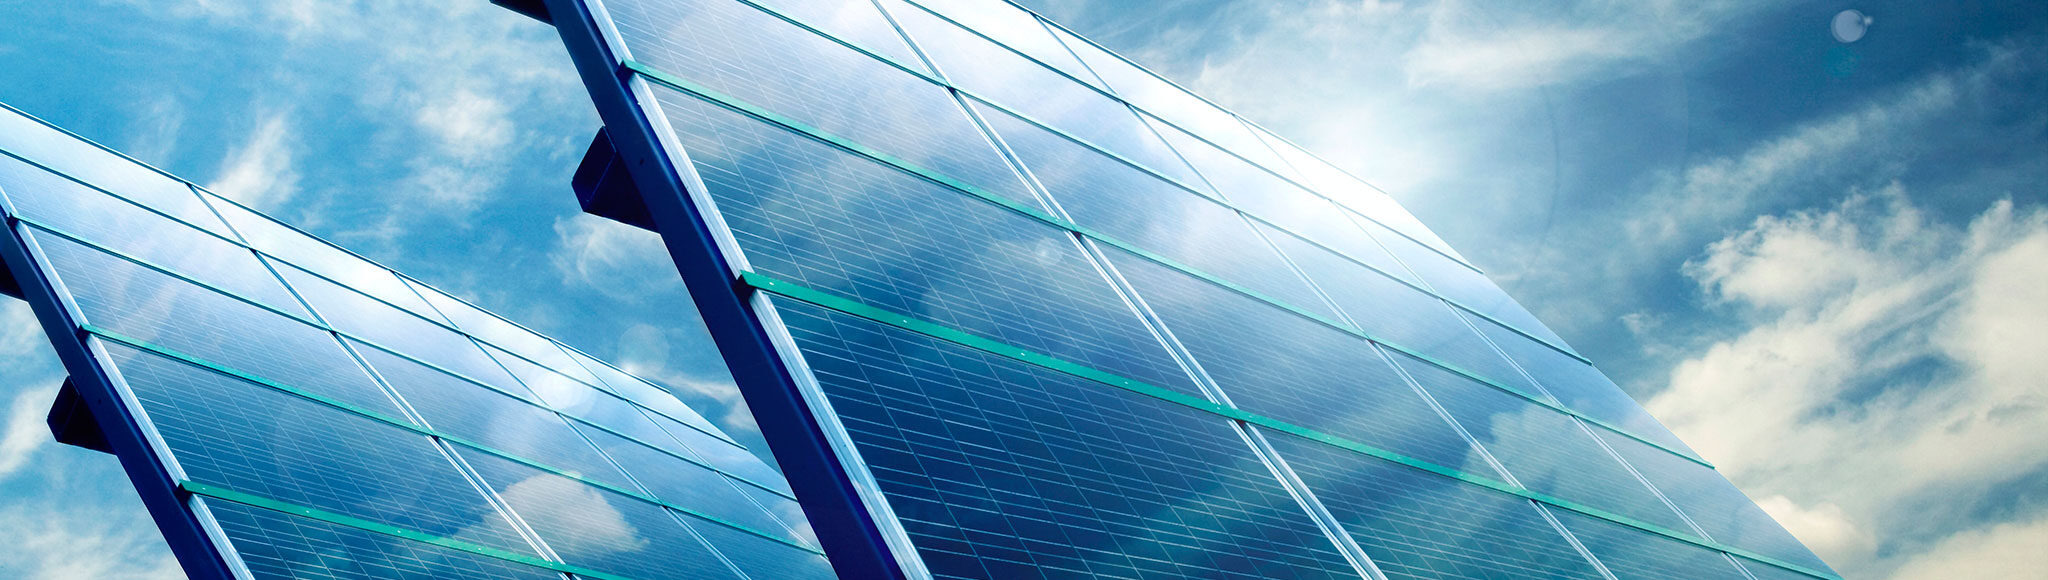 Experienced solar panel installers for commercial and residential properties